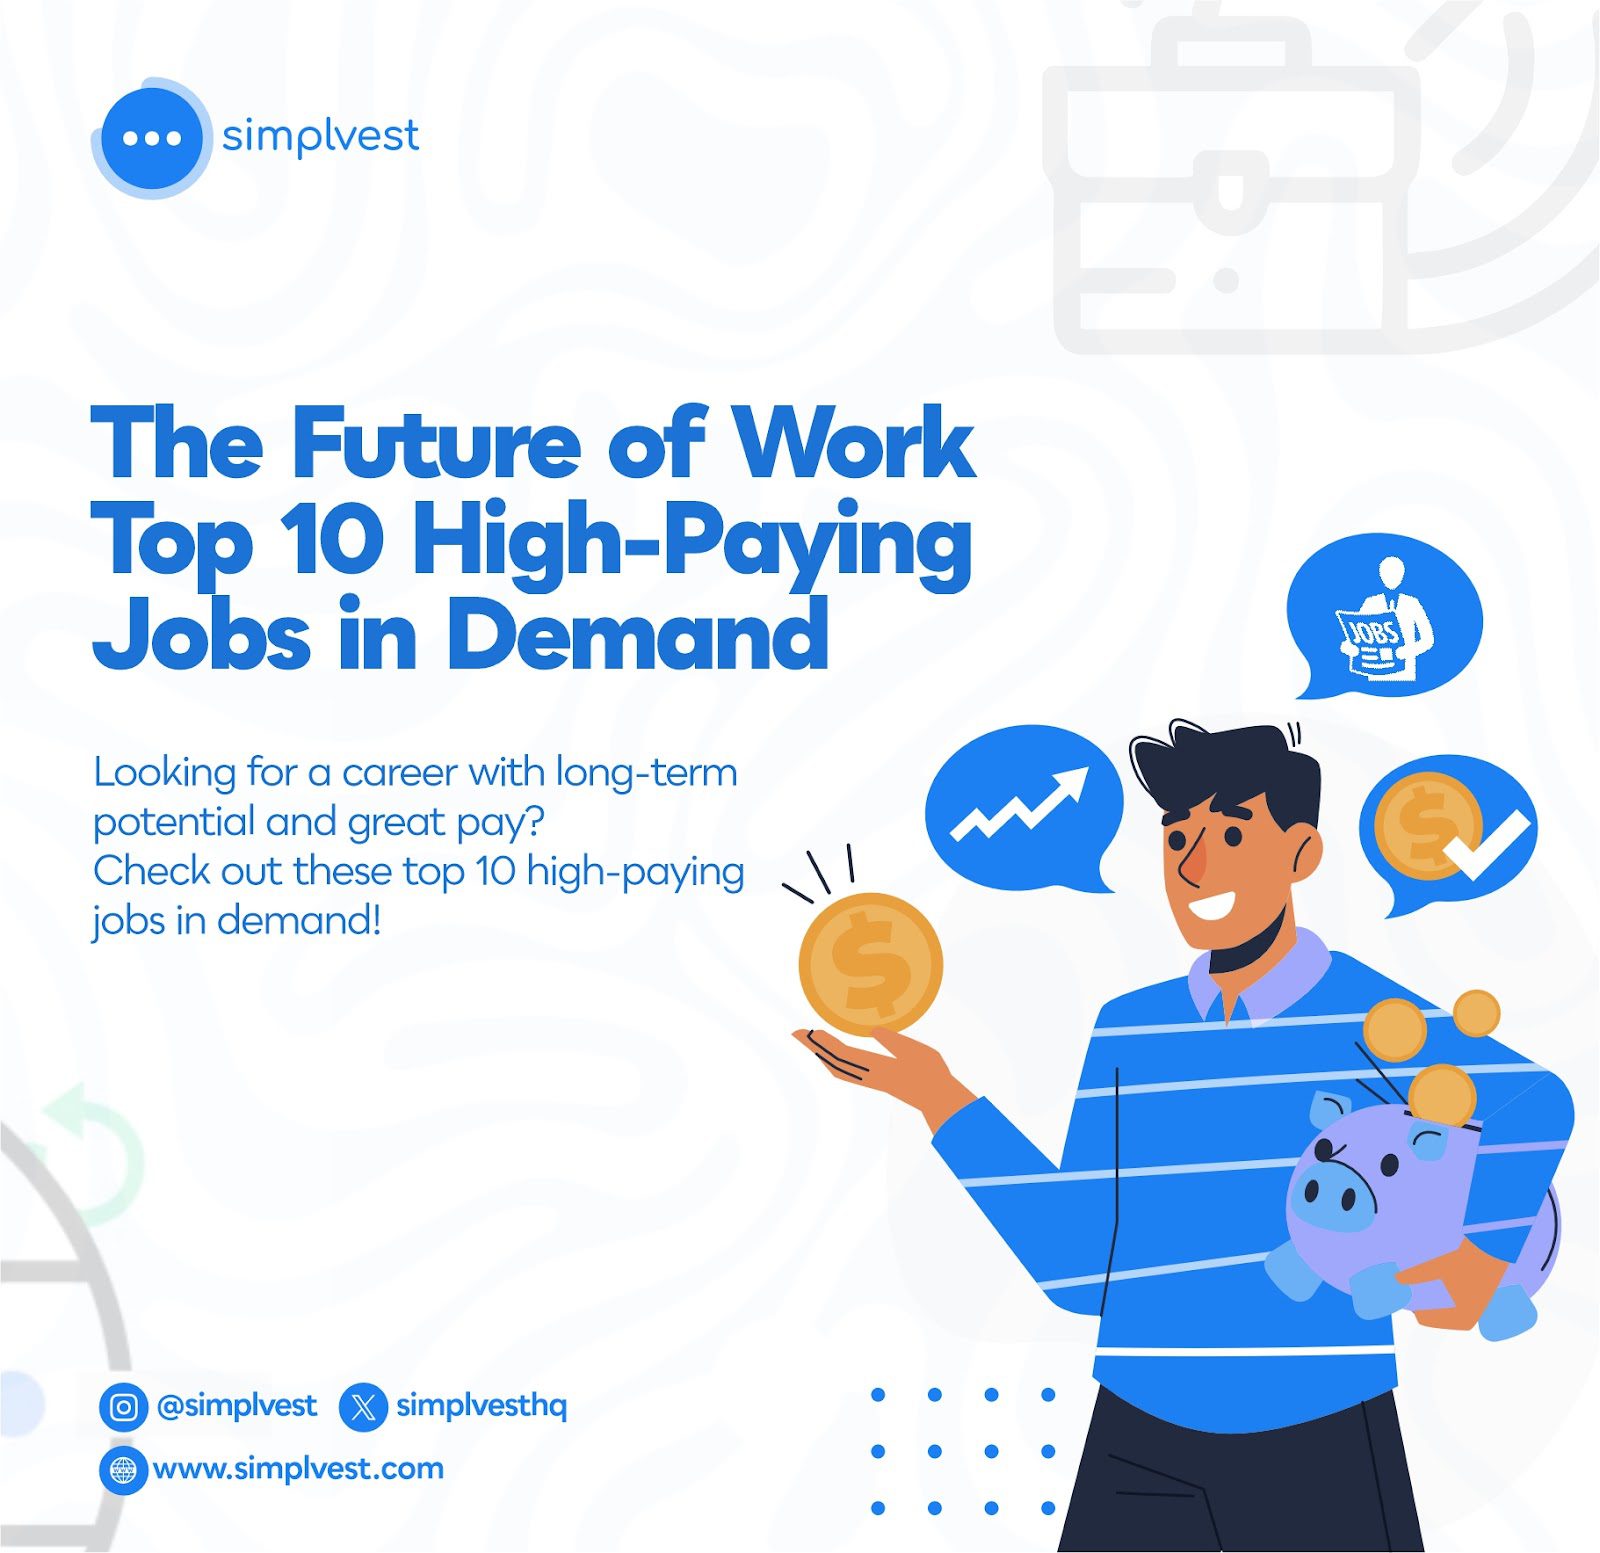 Top 10 High-Paying Jobs in Demand
